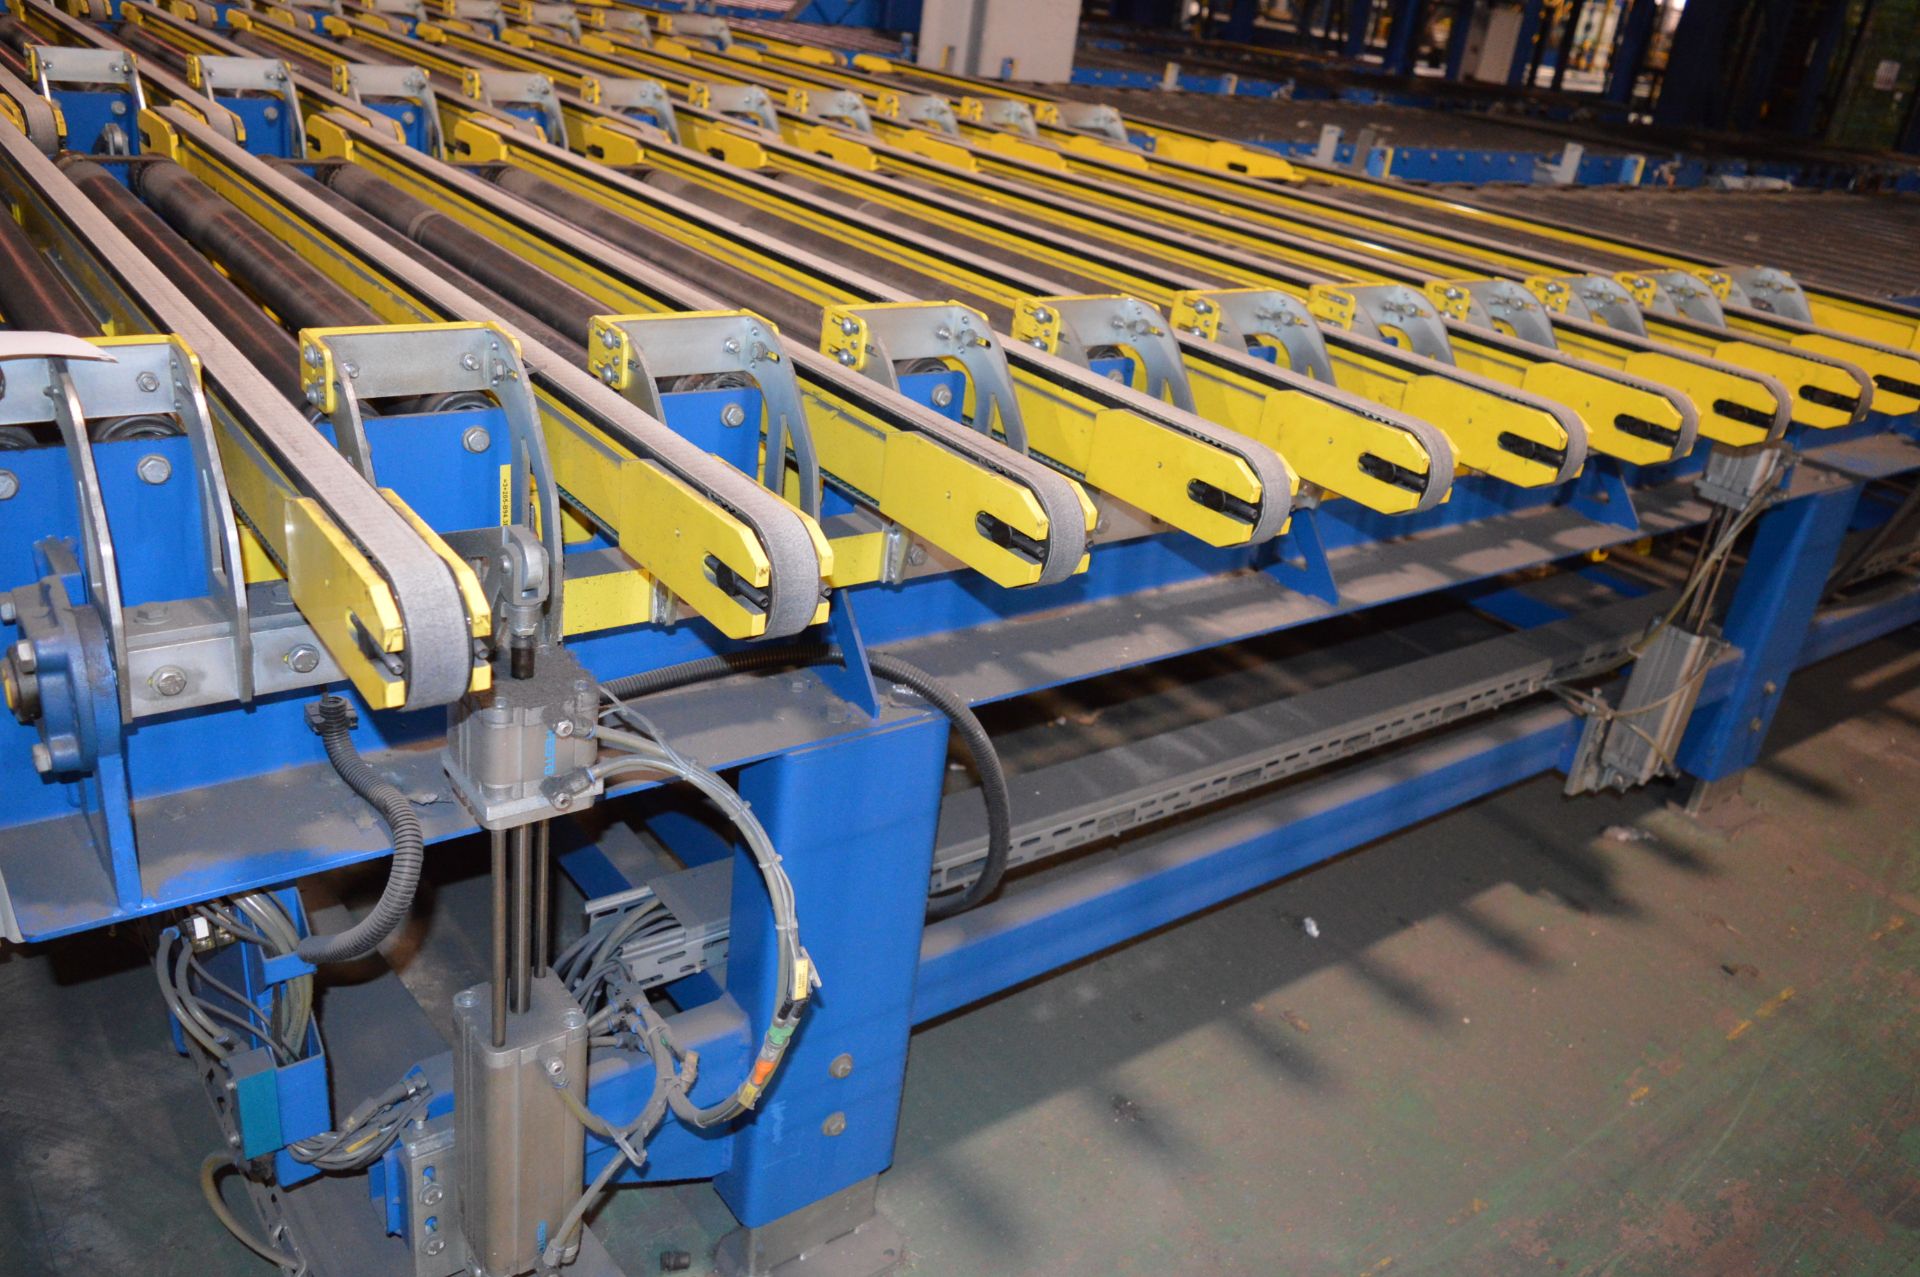 3 x Kraft, cross transfer motorised conveyors with outfeed rollers (2006) Each 4.7m (l) x 1.75m (